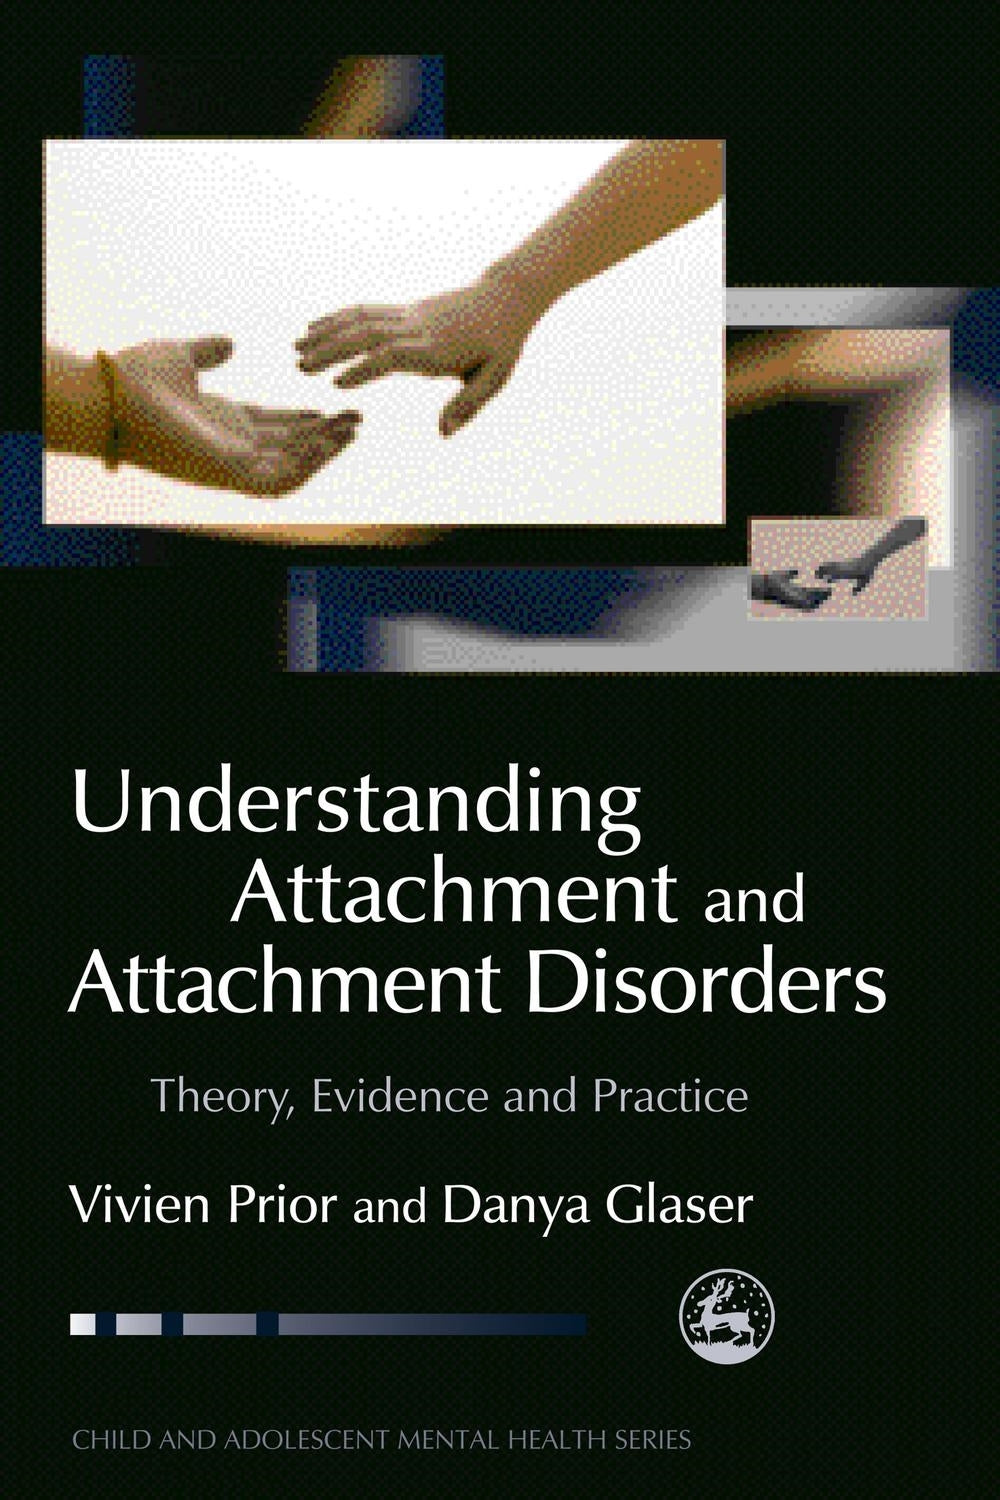 Understanding Attachment and Attachment Disorders by Vivien Prior, Danya Glaser